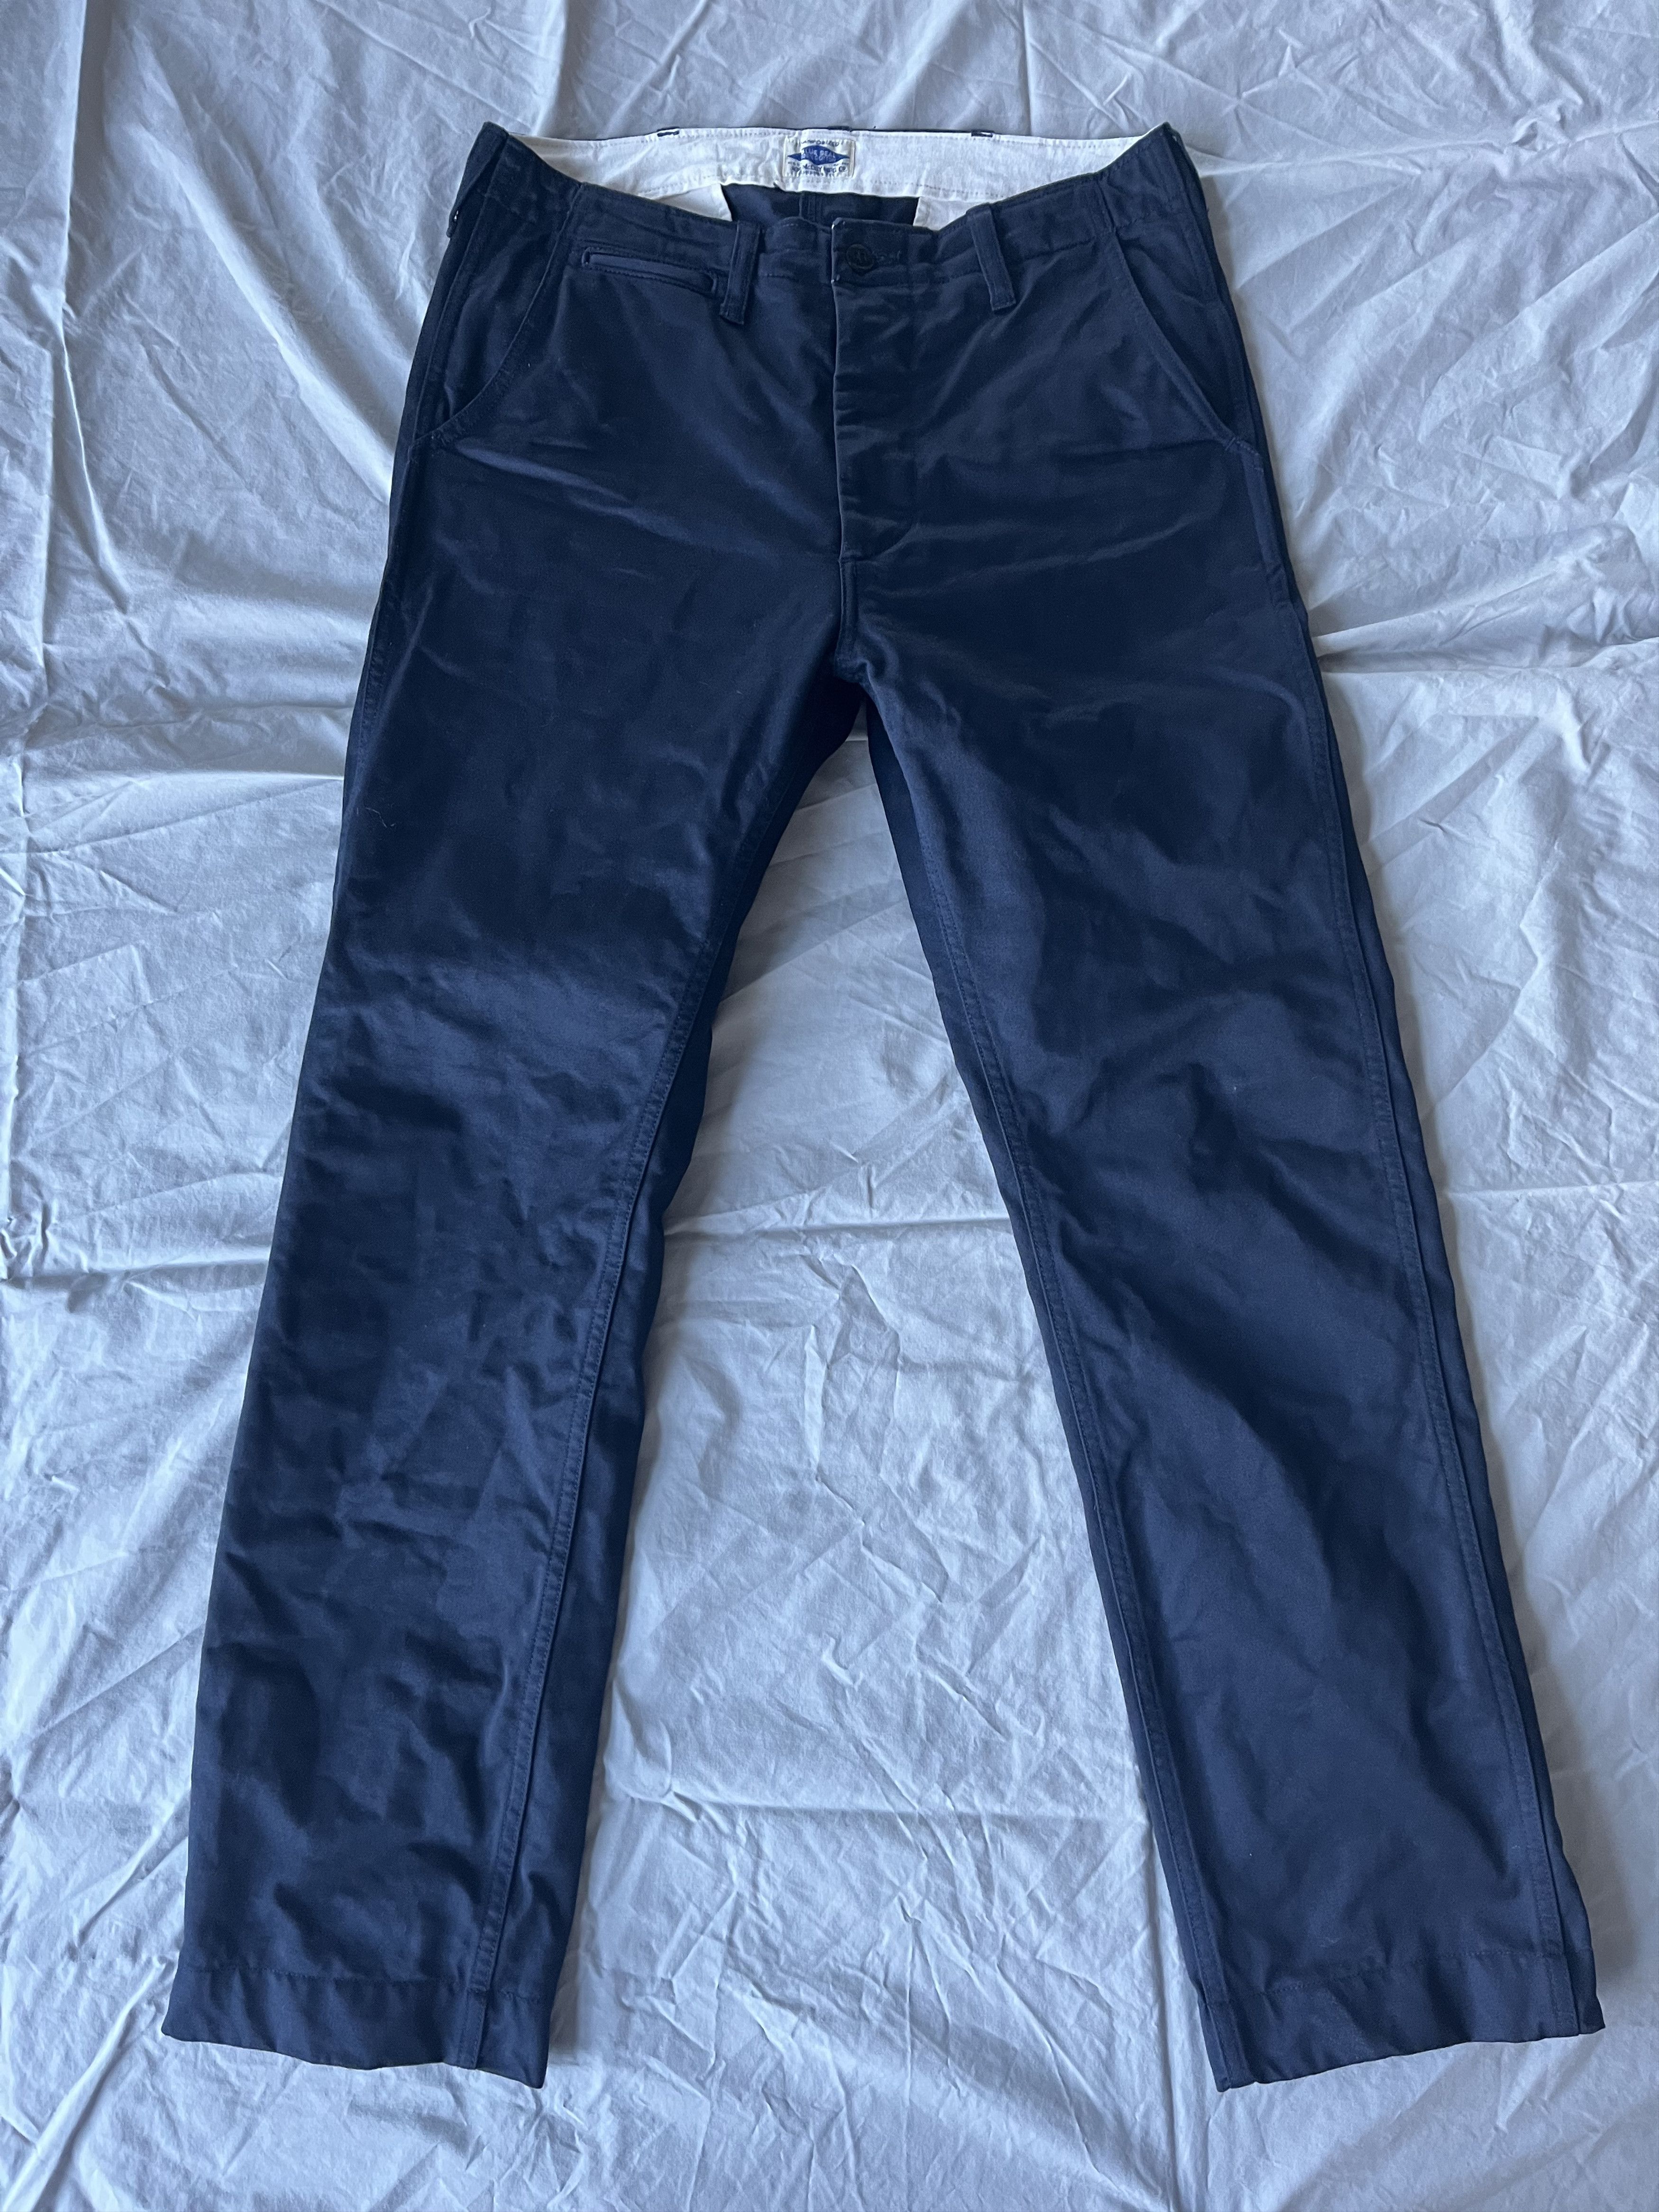 The Real McCoy's The Real McCoys Blue Seal Chino Trousers Navy Size 32 ...